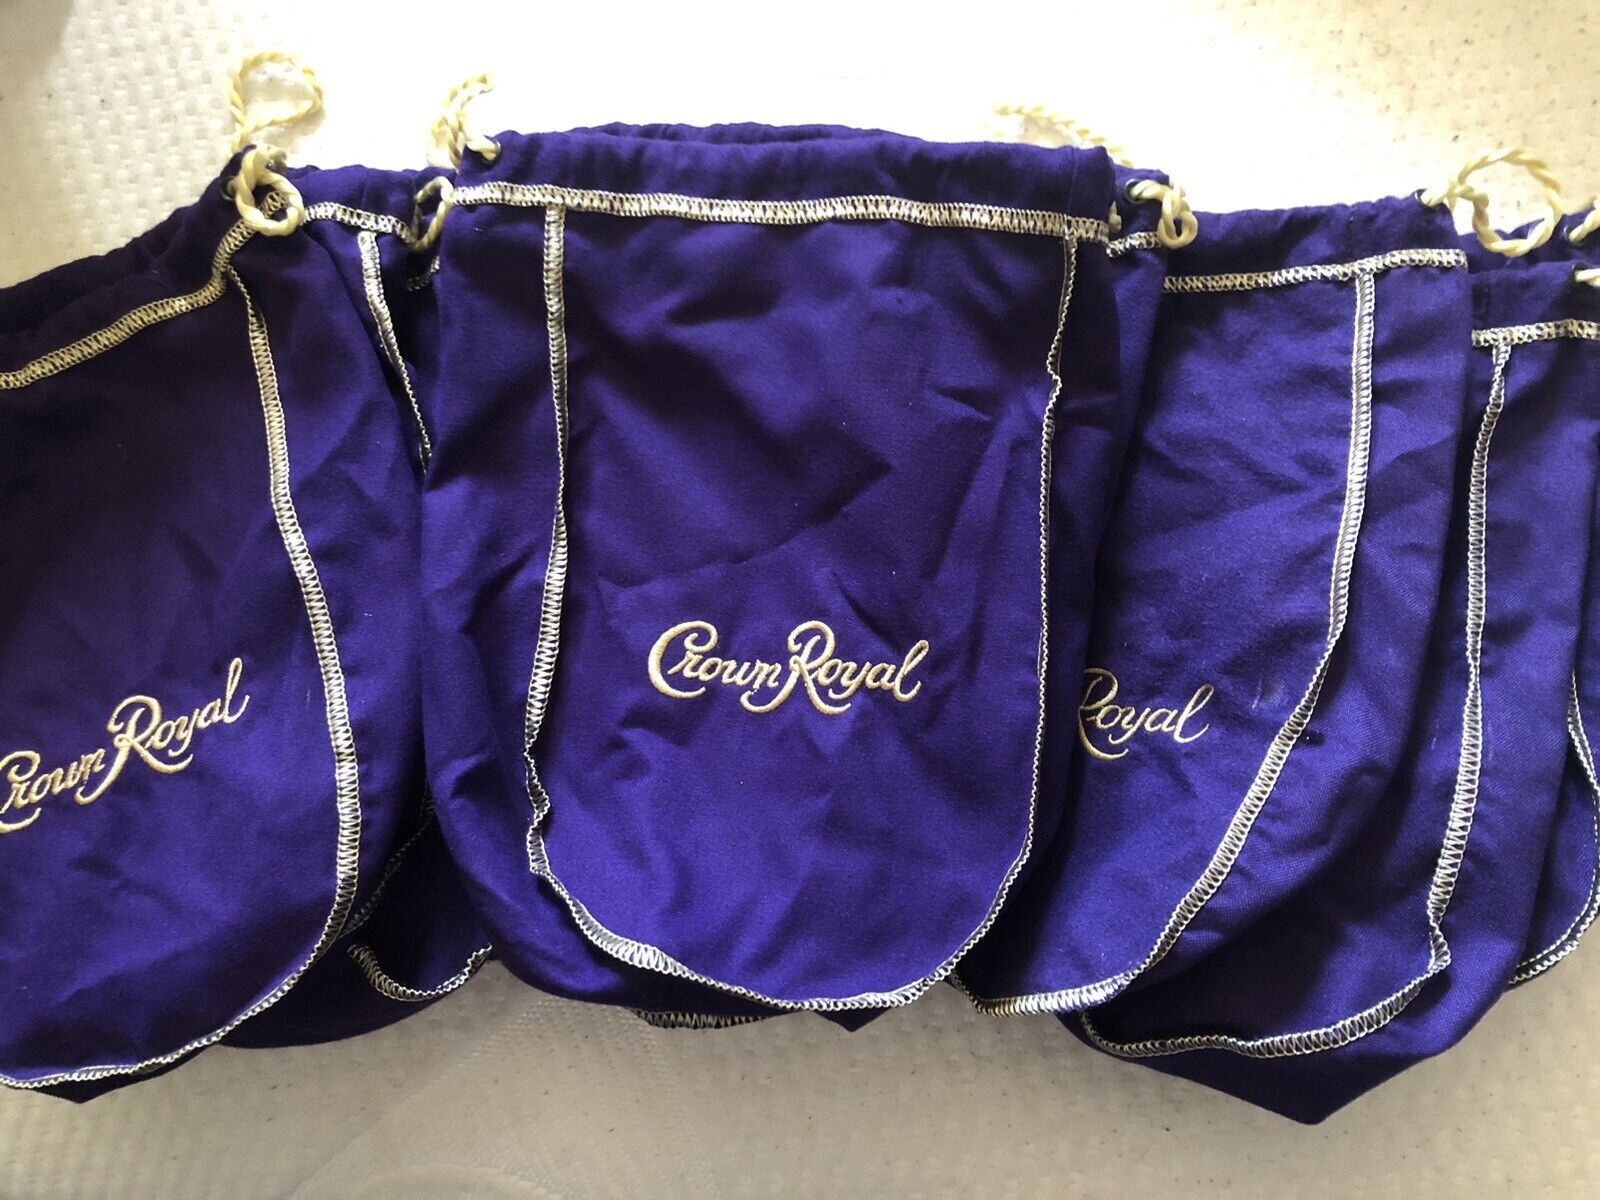 Crown Royal Bags Lot of 10 (5 Lots available: total available 50)